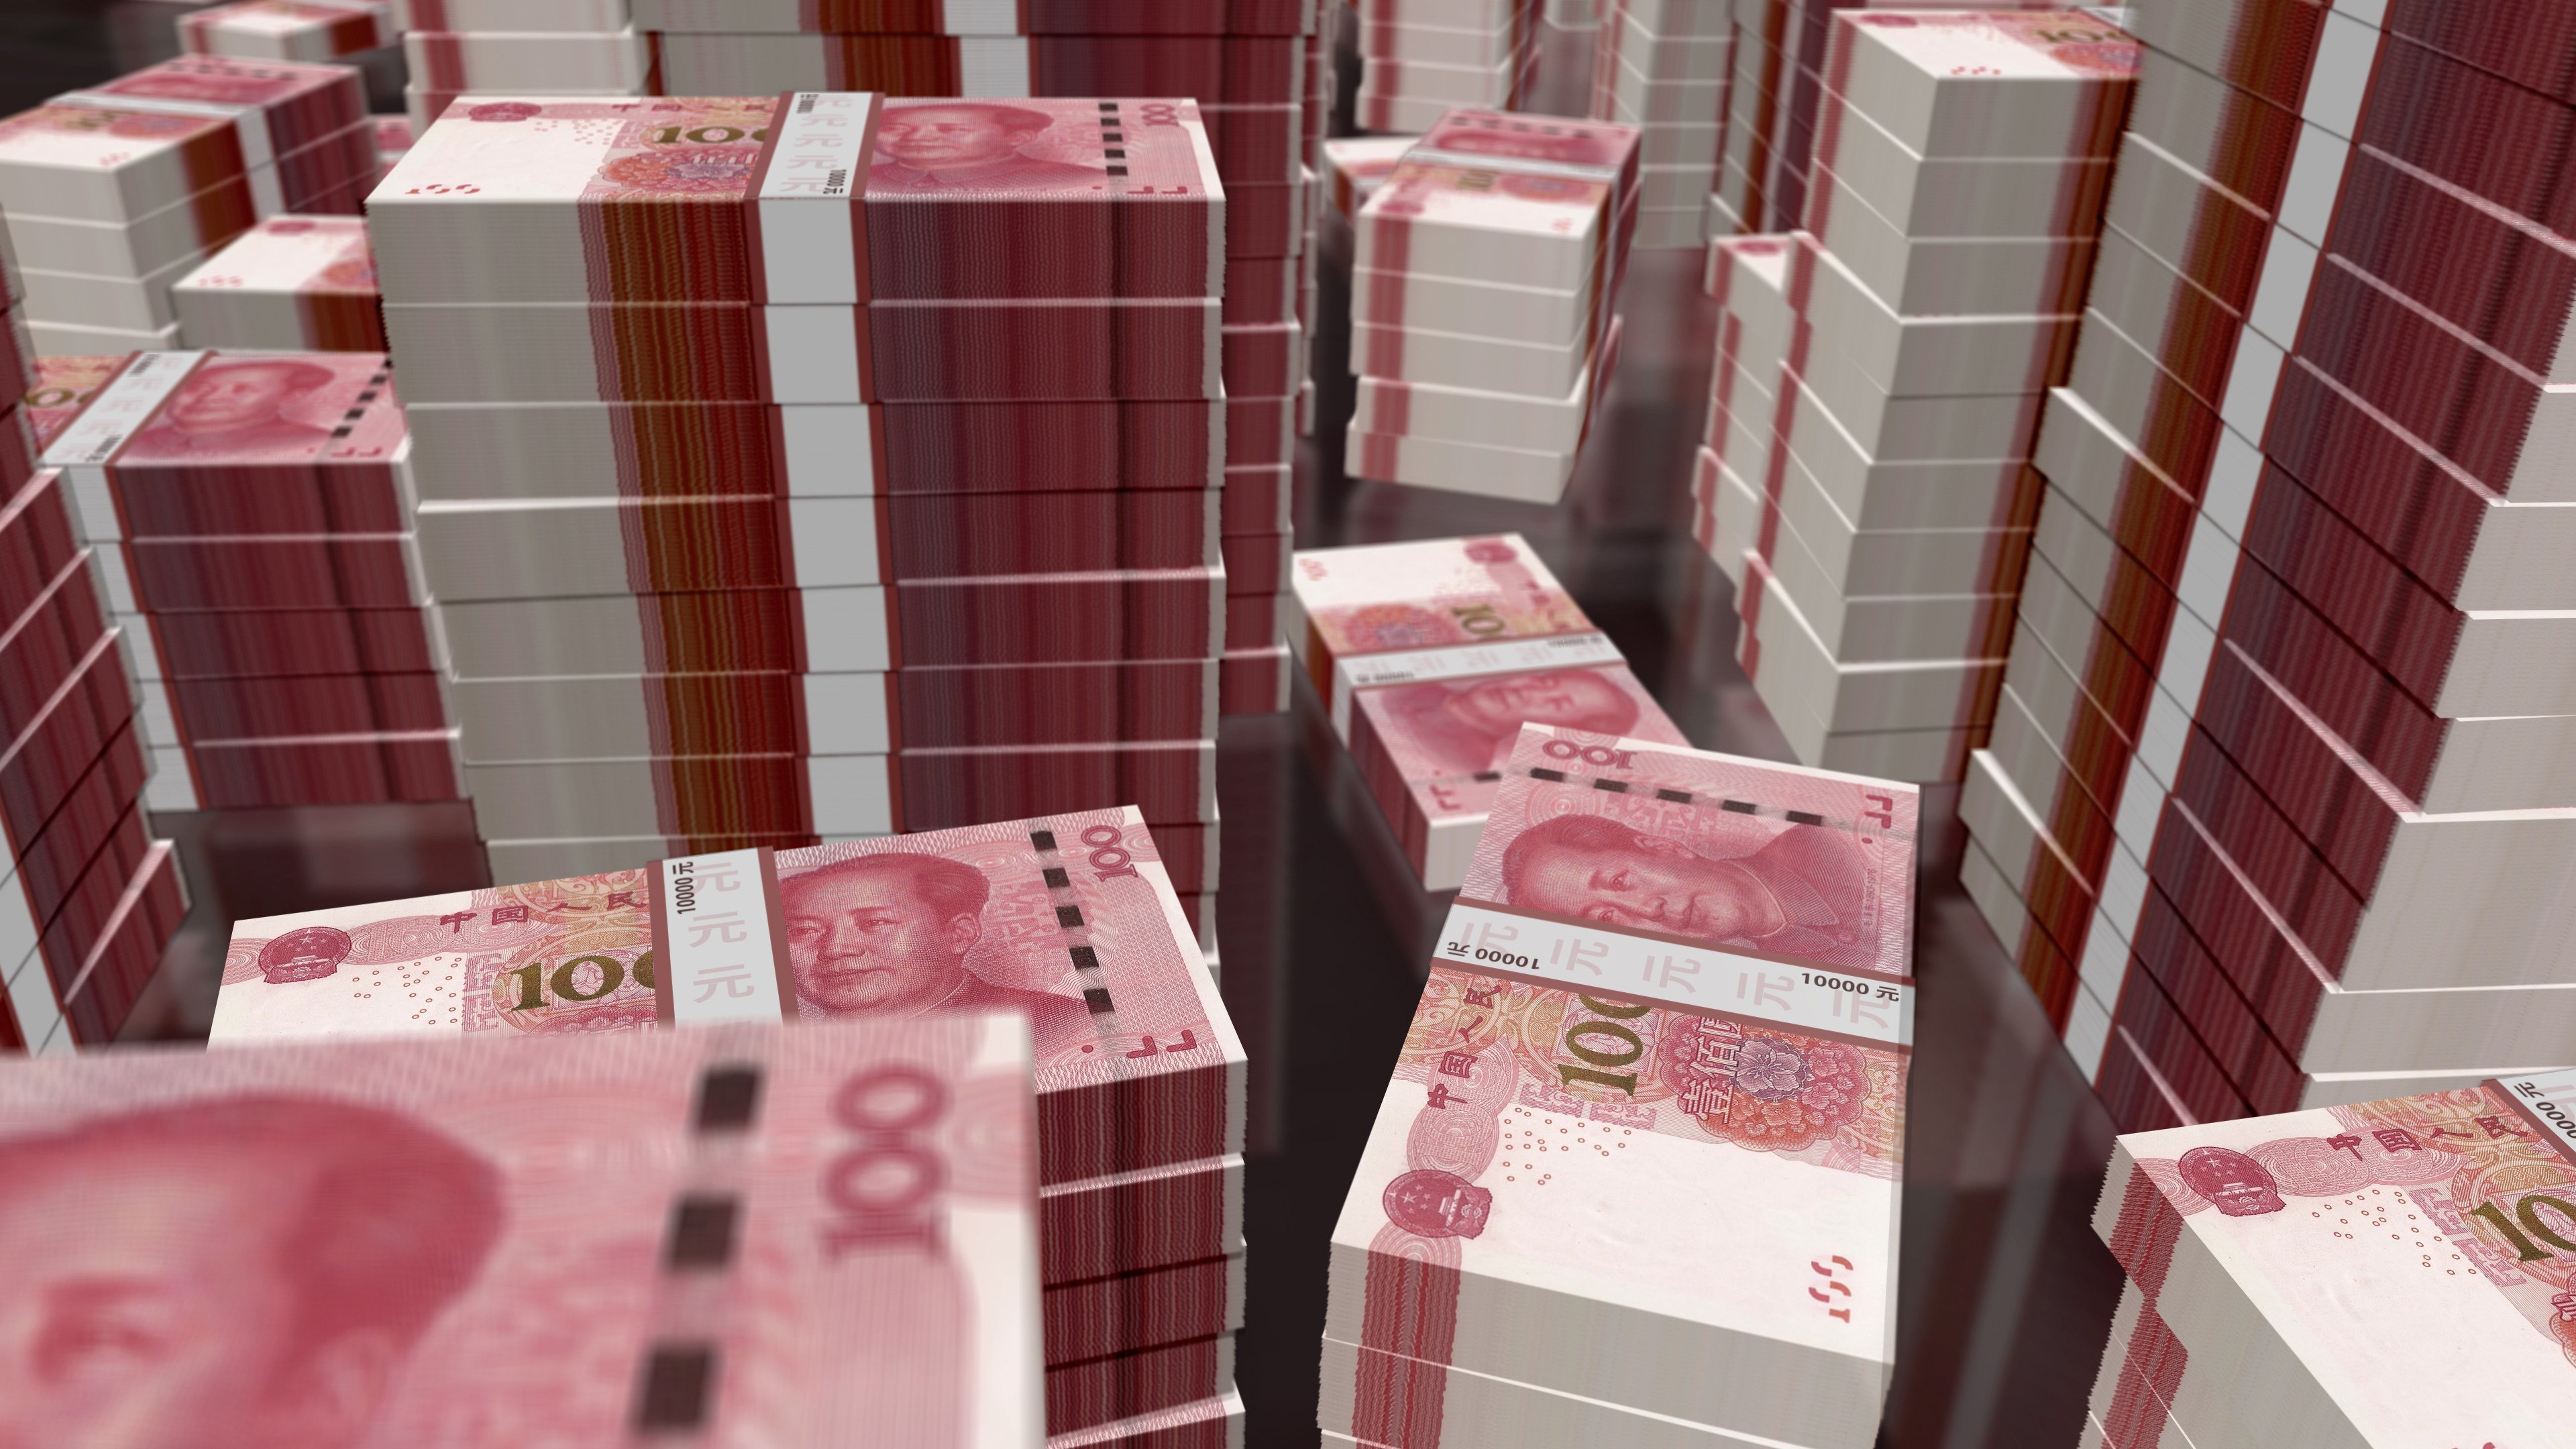 The yuan, China’s currency, has been under depreciation pressures and a low rate of internationalisation has been reported in recent months. Photo: Shutterstock